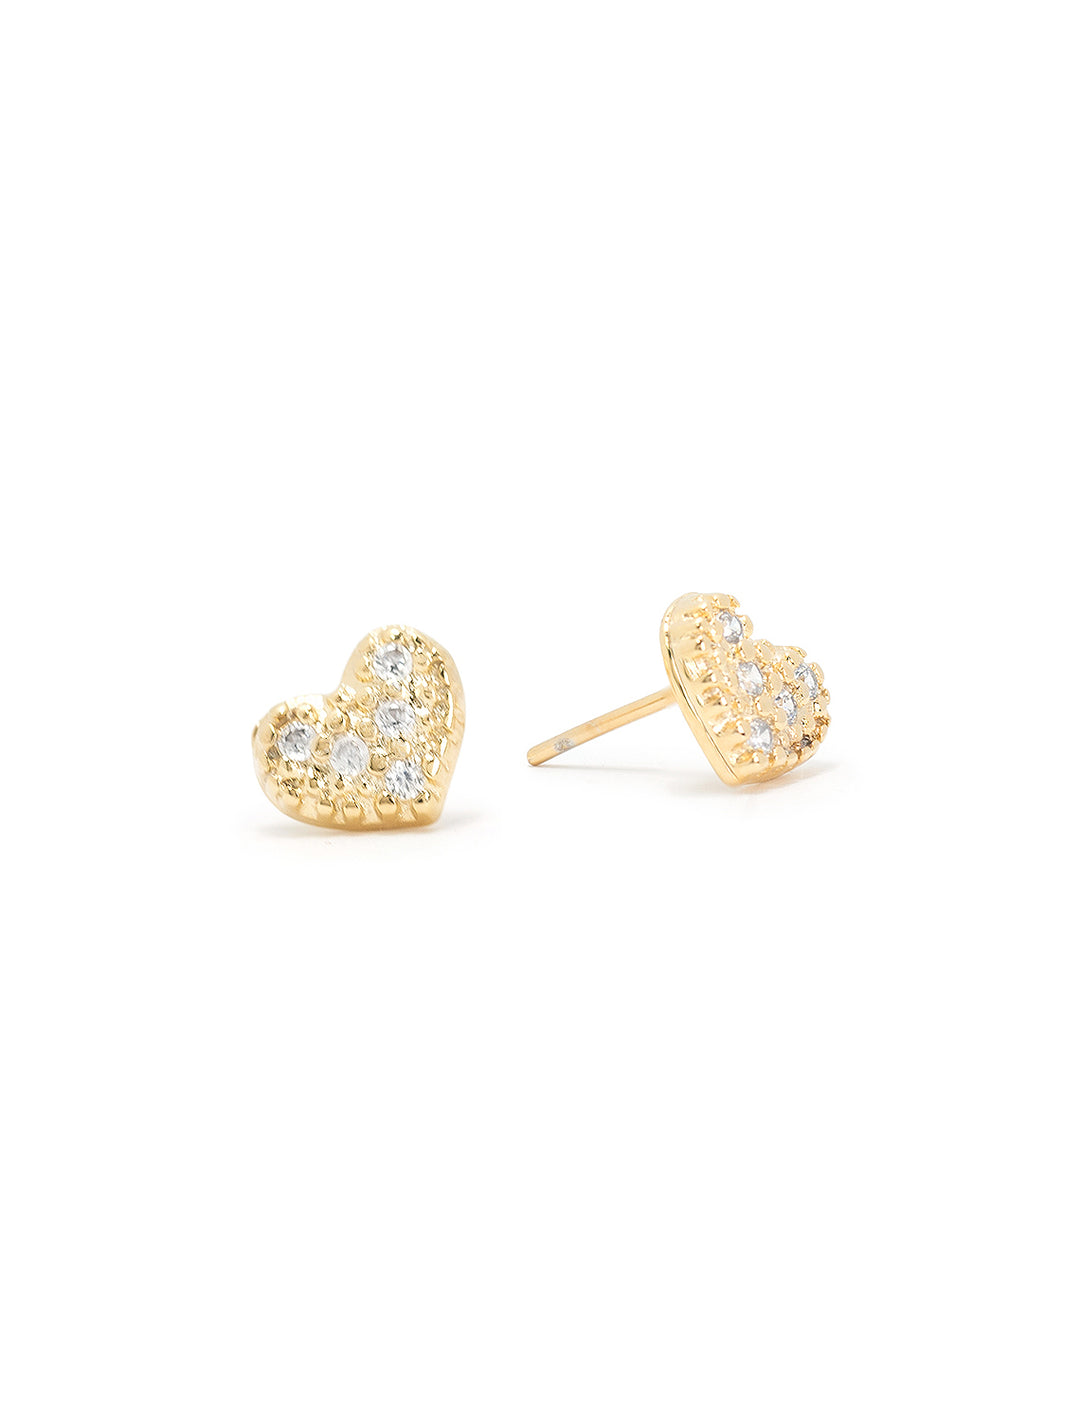 Front view of Jonesy Wood's gold filled pave heart studs.